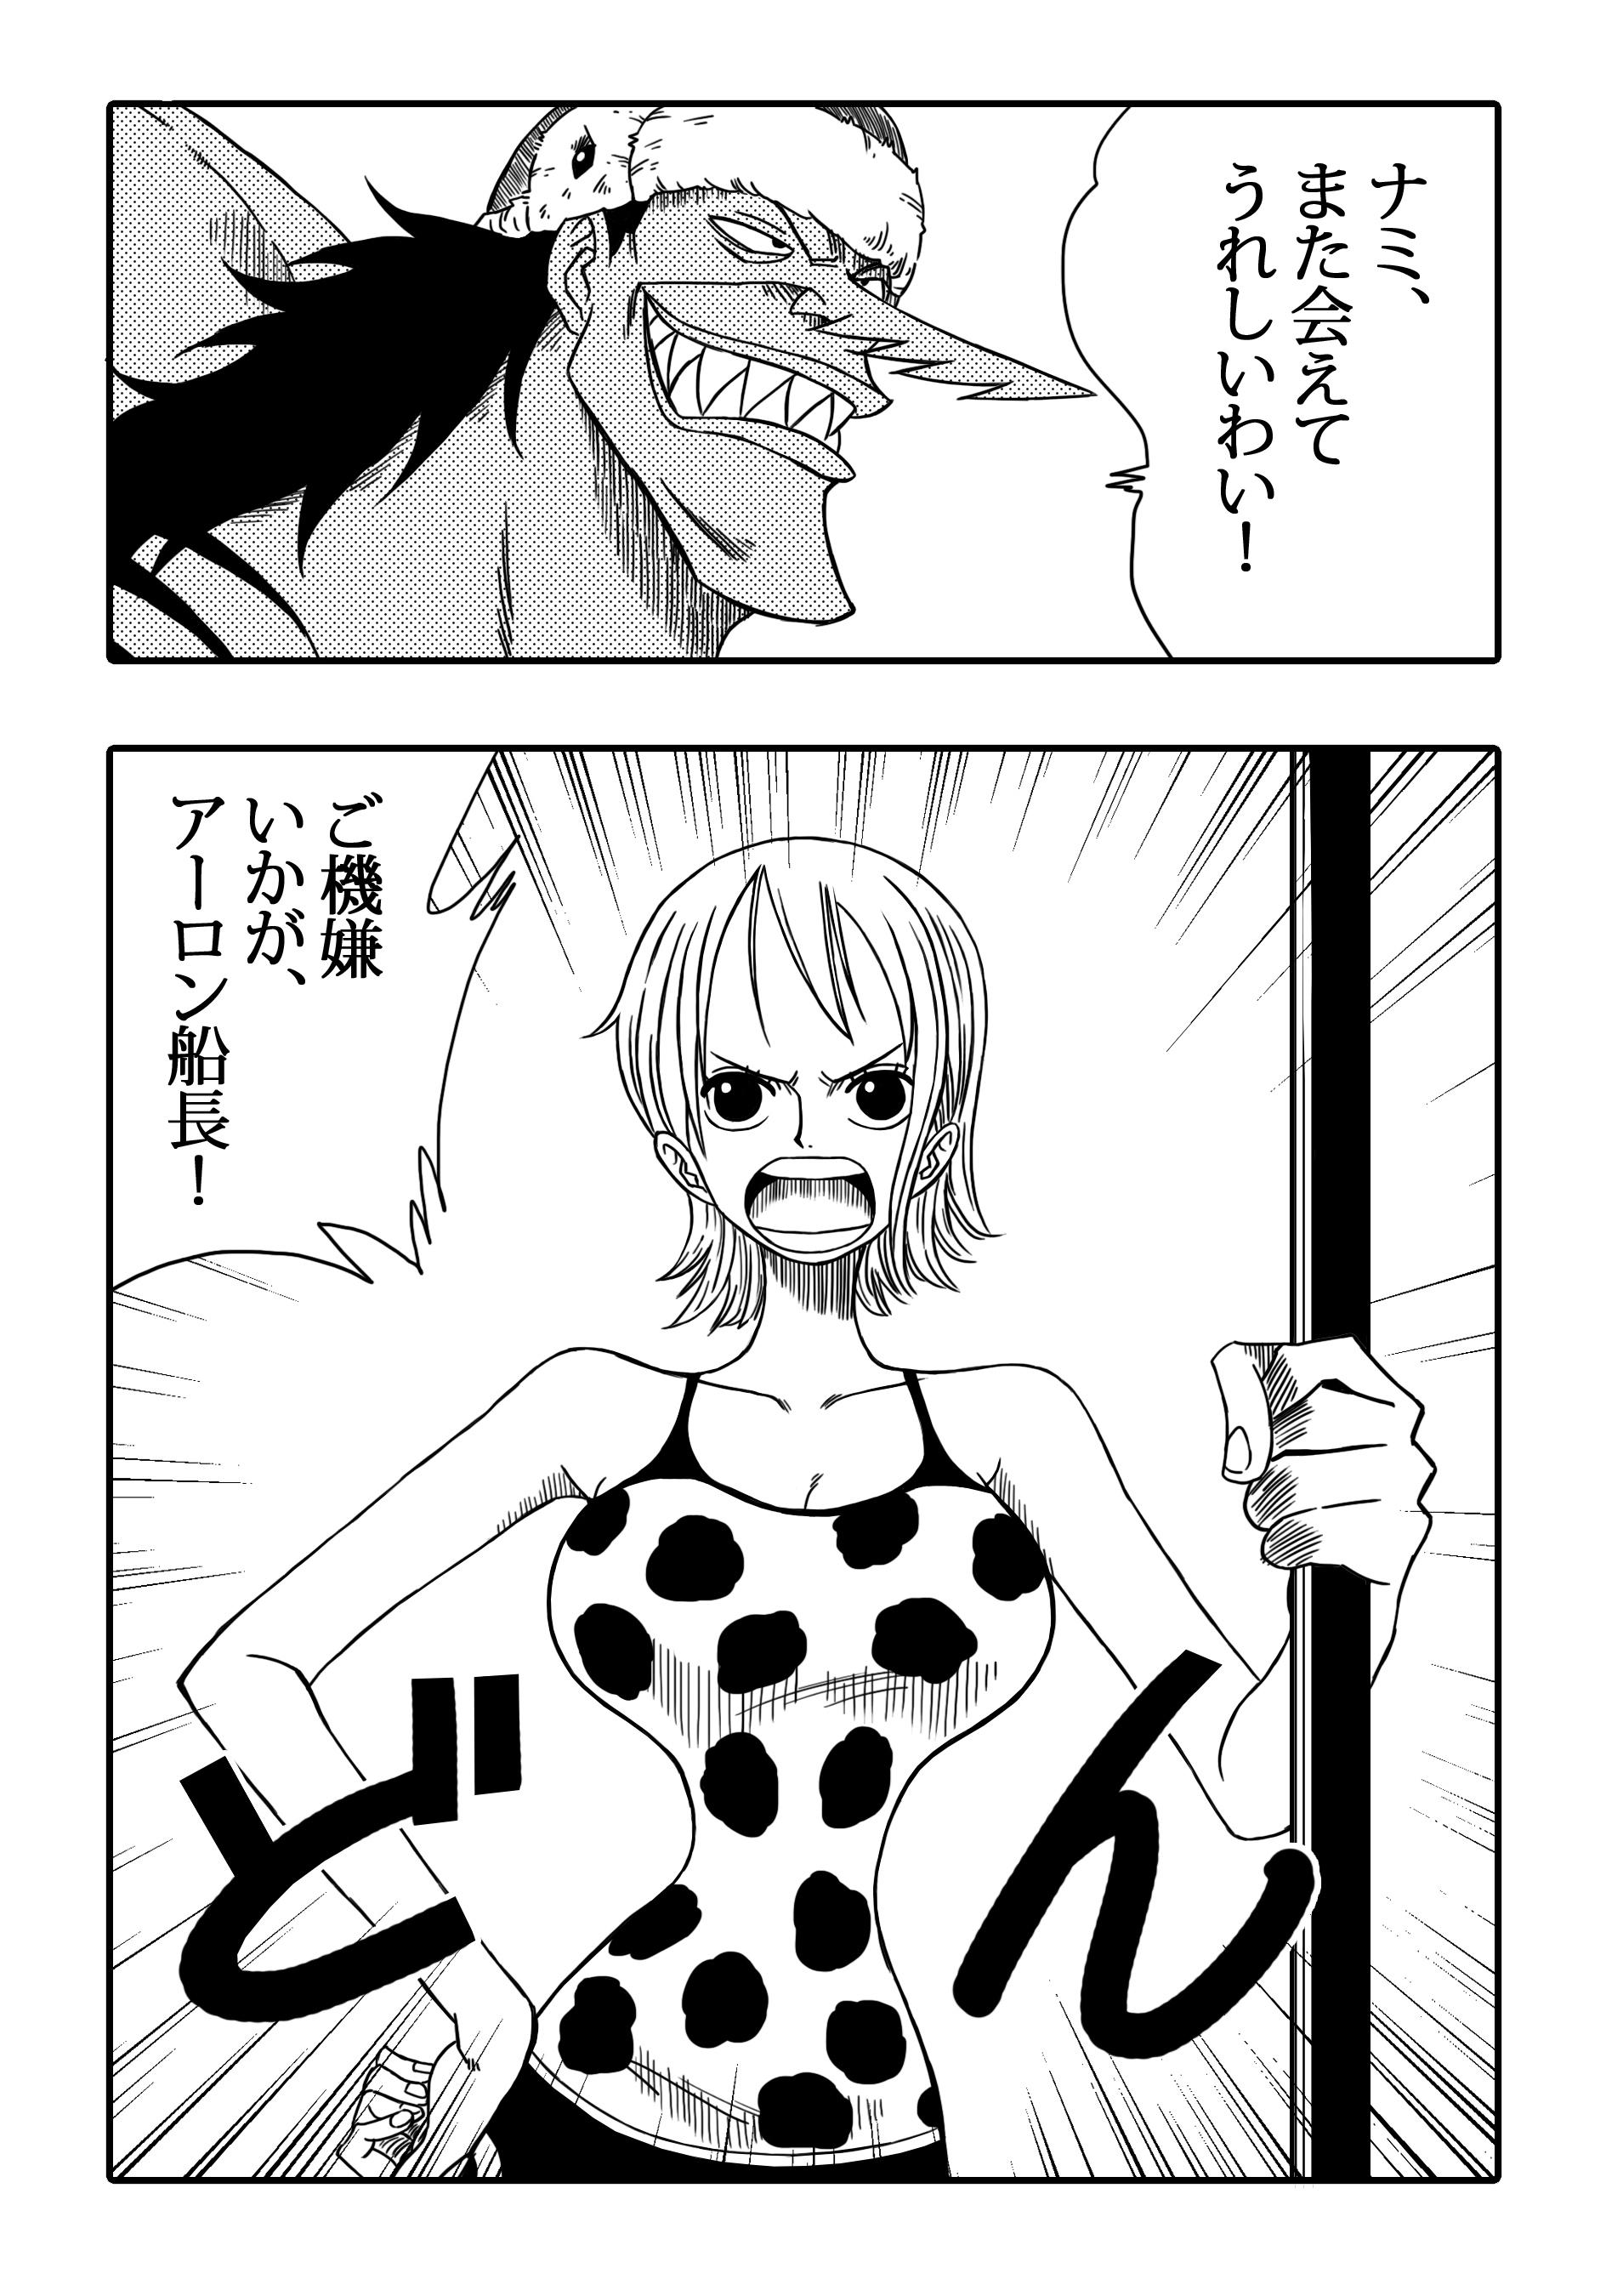 From Two Piece - Nami vs Arlong - One piece Livecams - Page 3